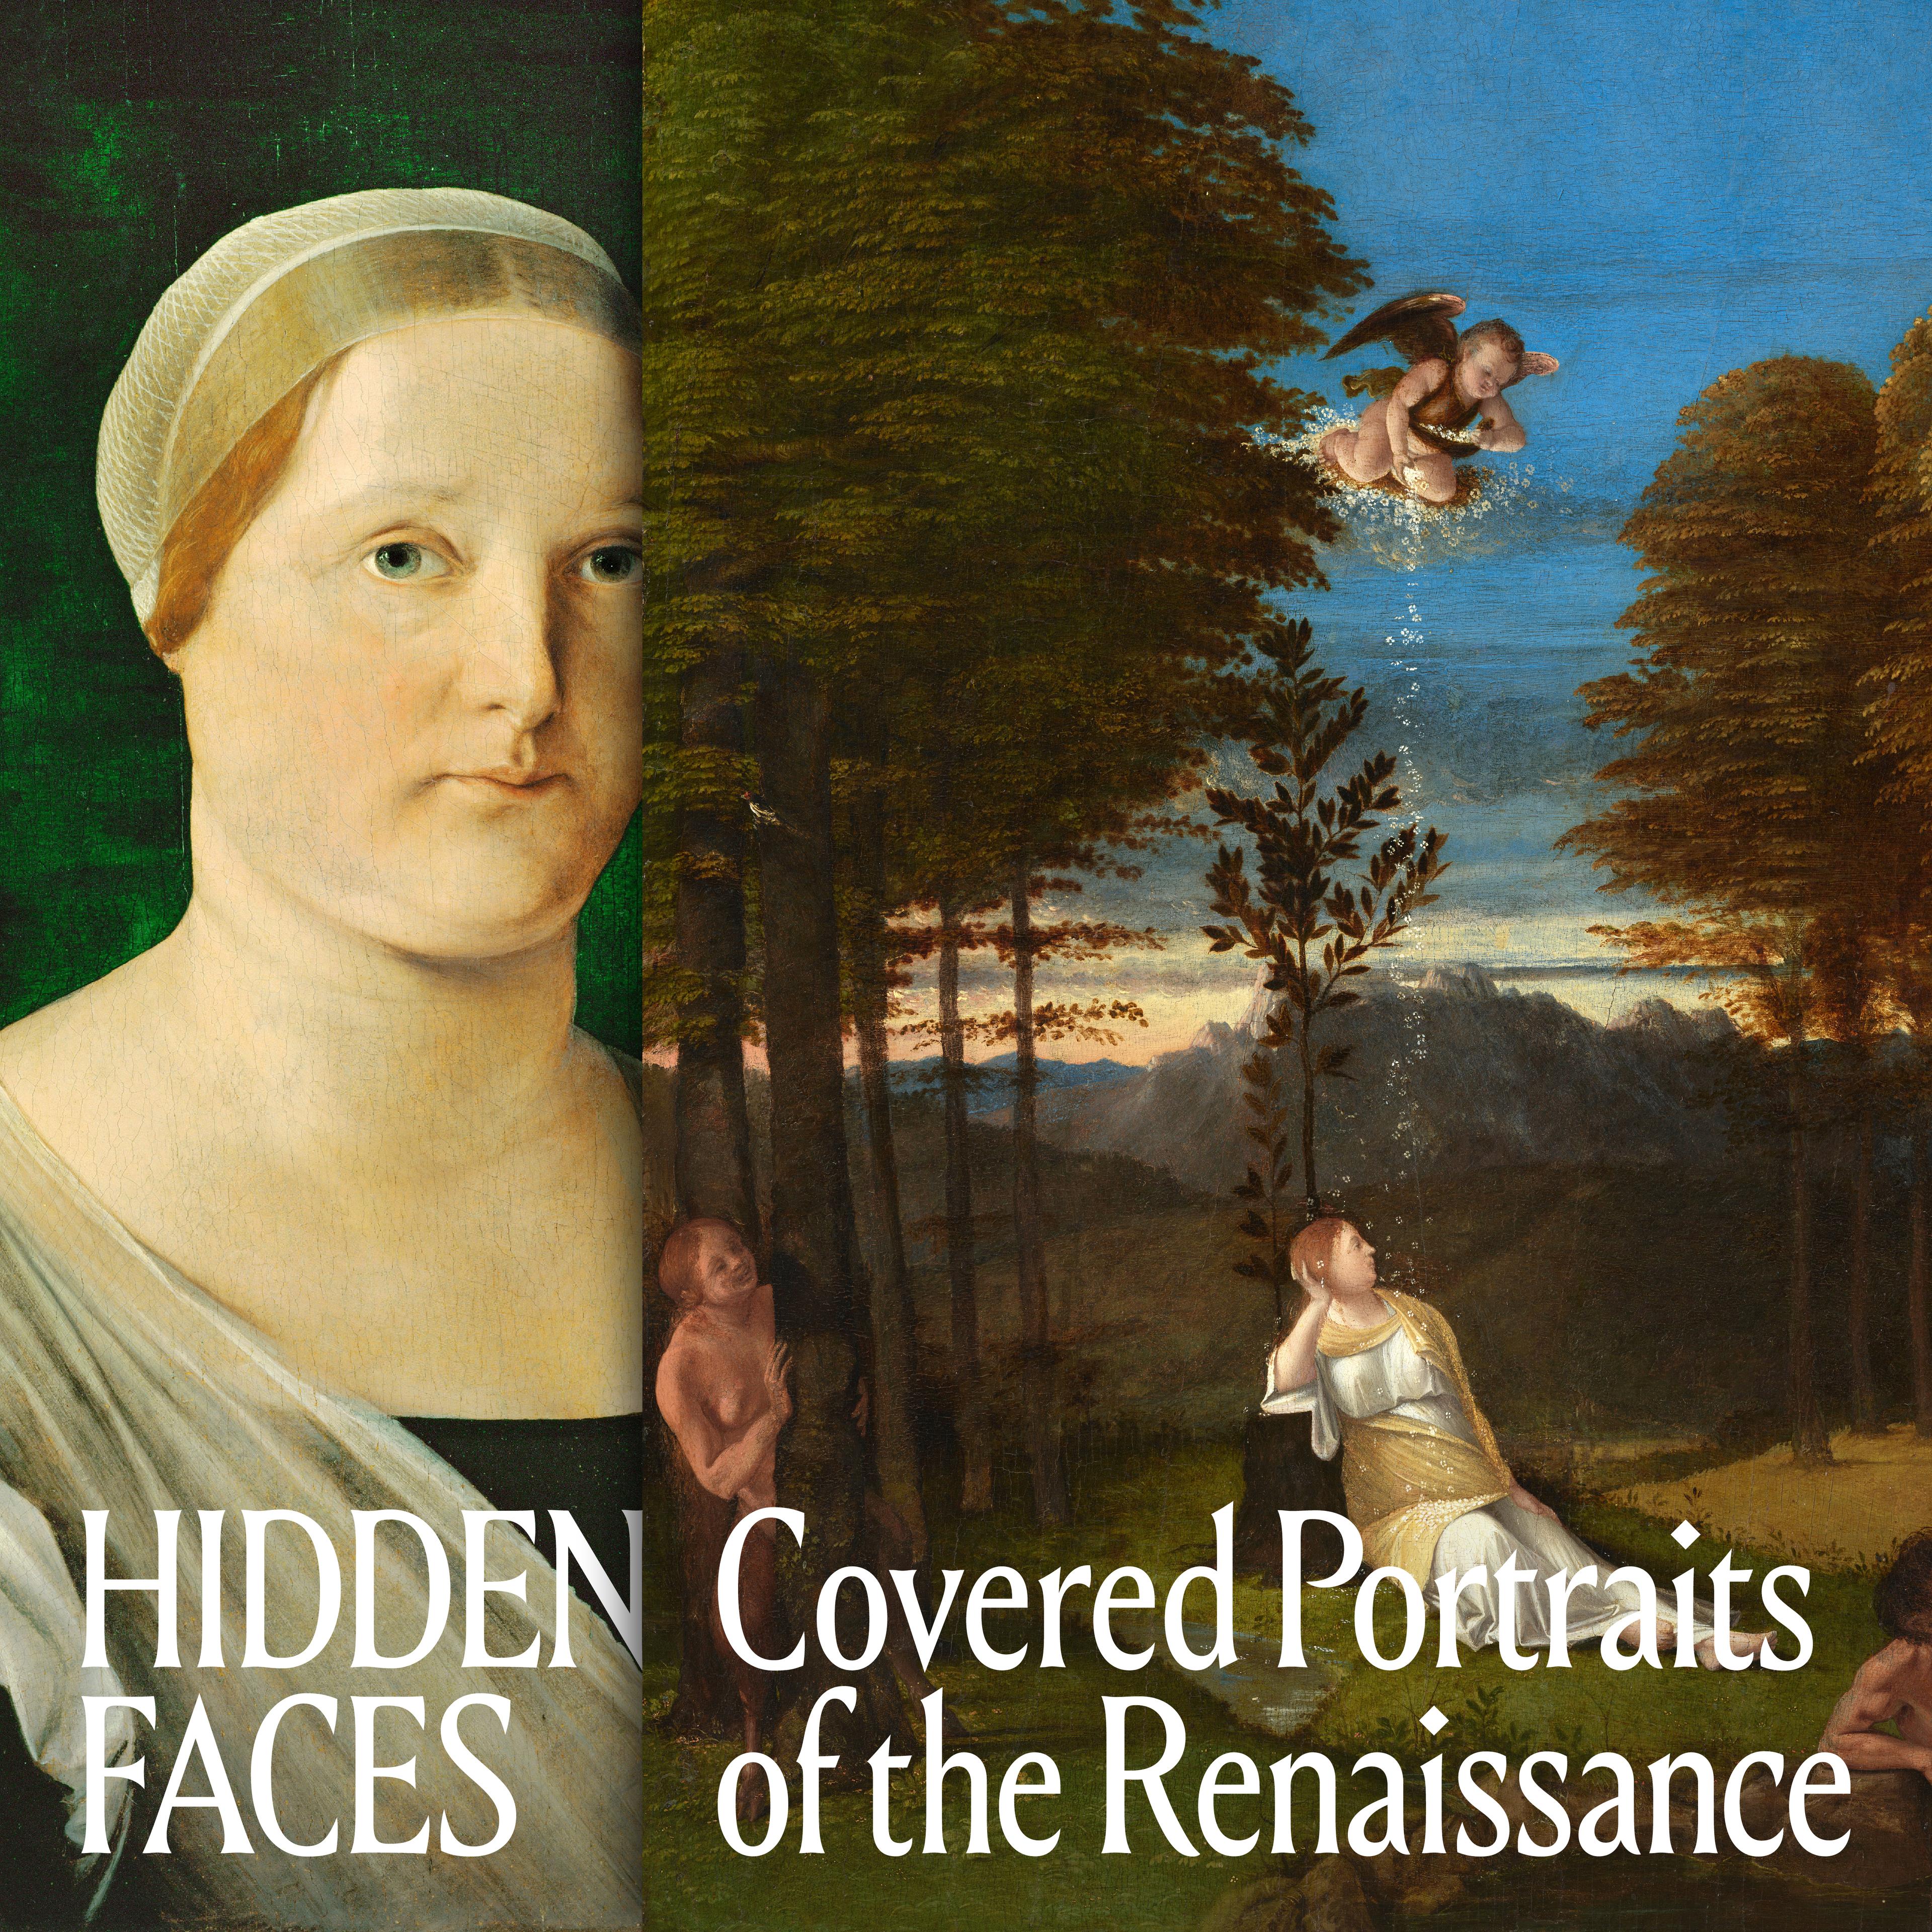 A composite image featuring renaissance portrait paintings with partially obscured faces, set against a countryside backdrop, titled "hidden faces: covered portraits of the renaissance.